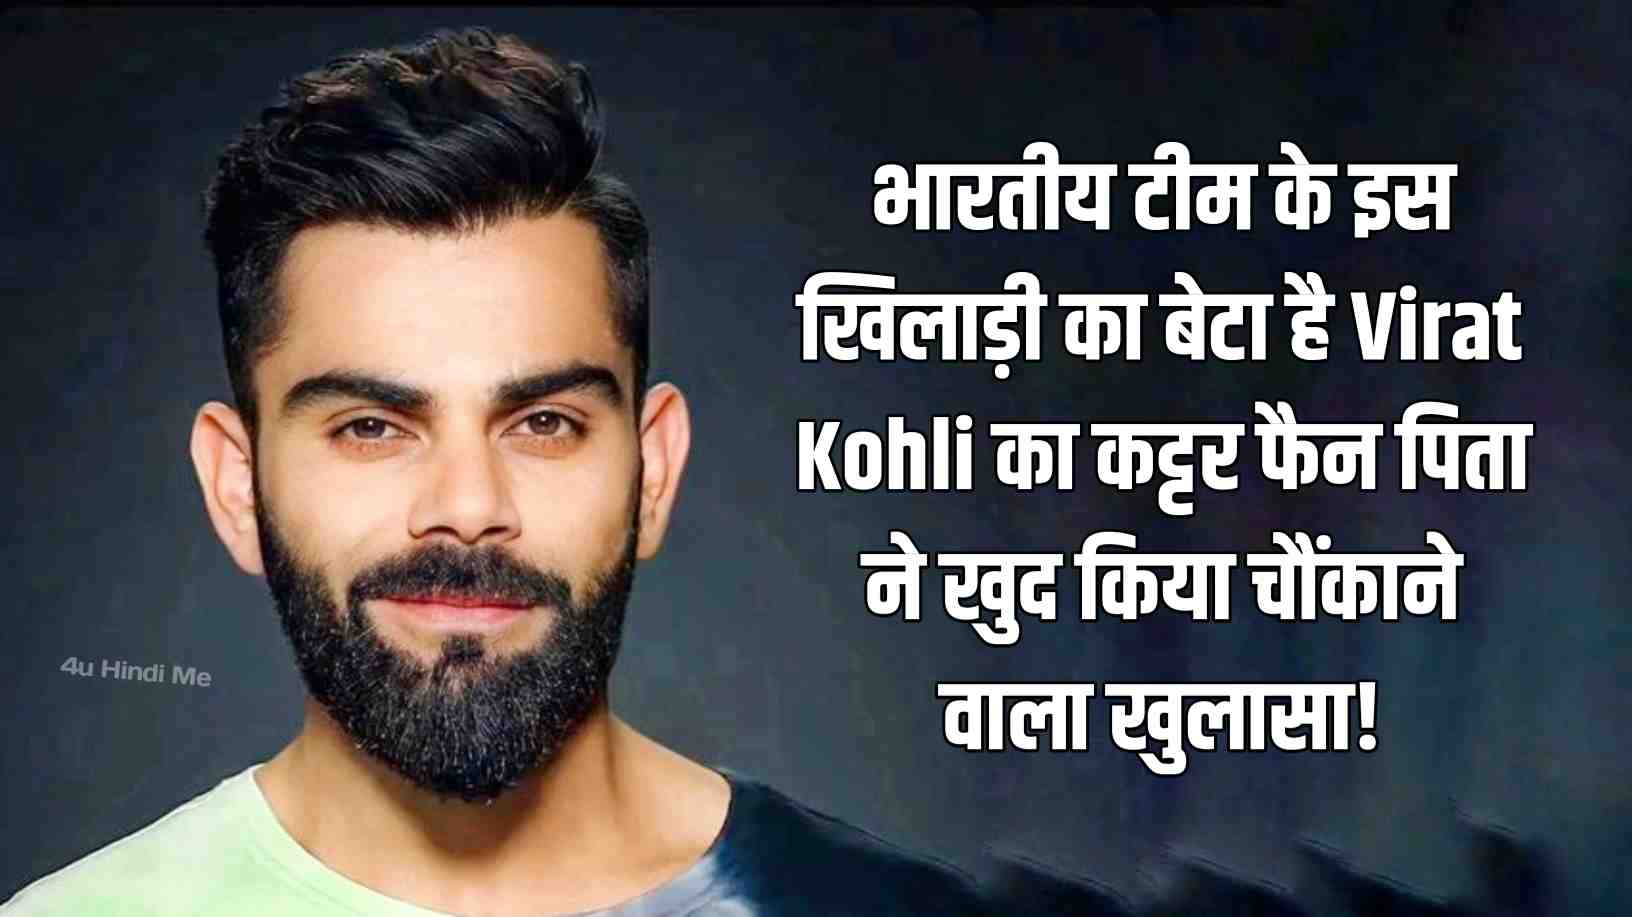 The son of this Indian team player is a staunch fan of Virat Kohli